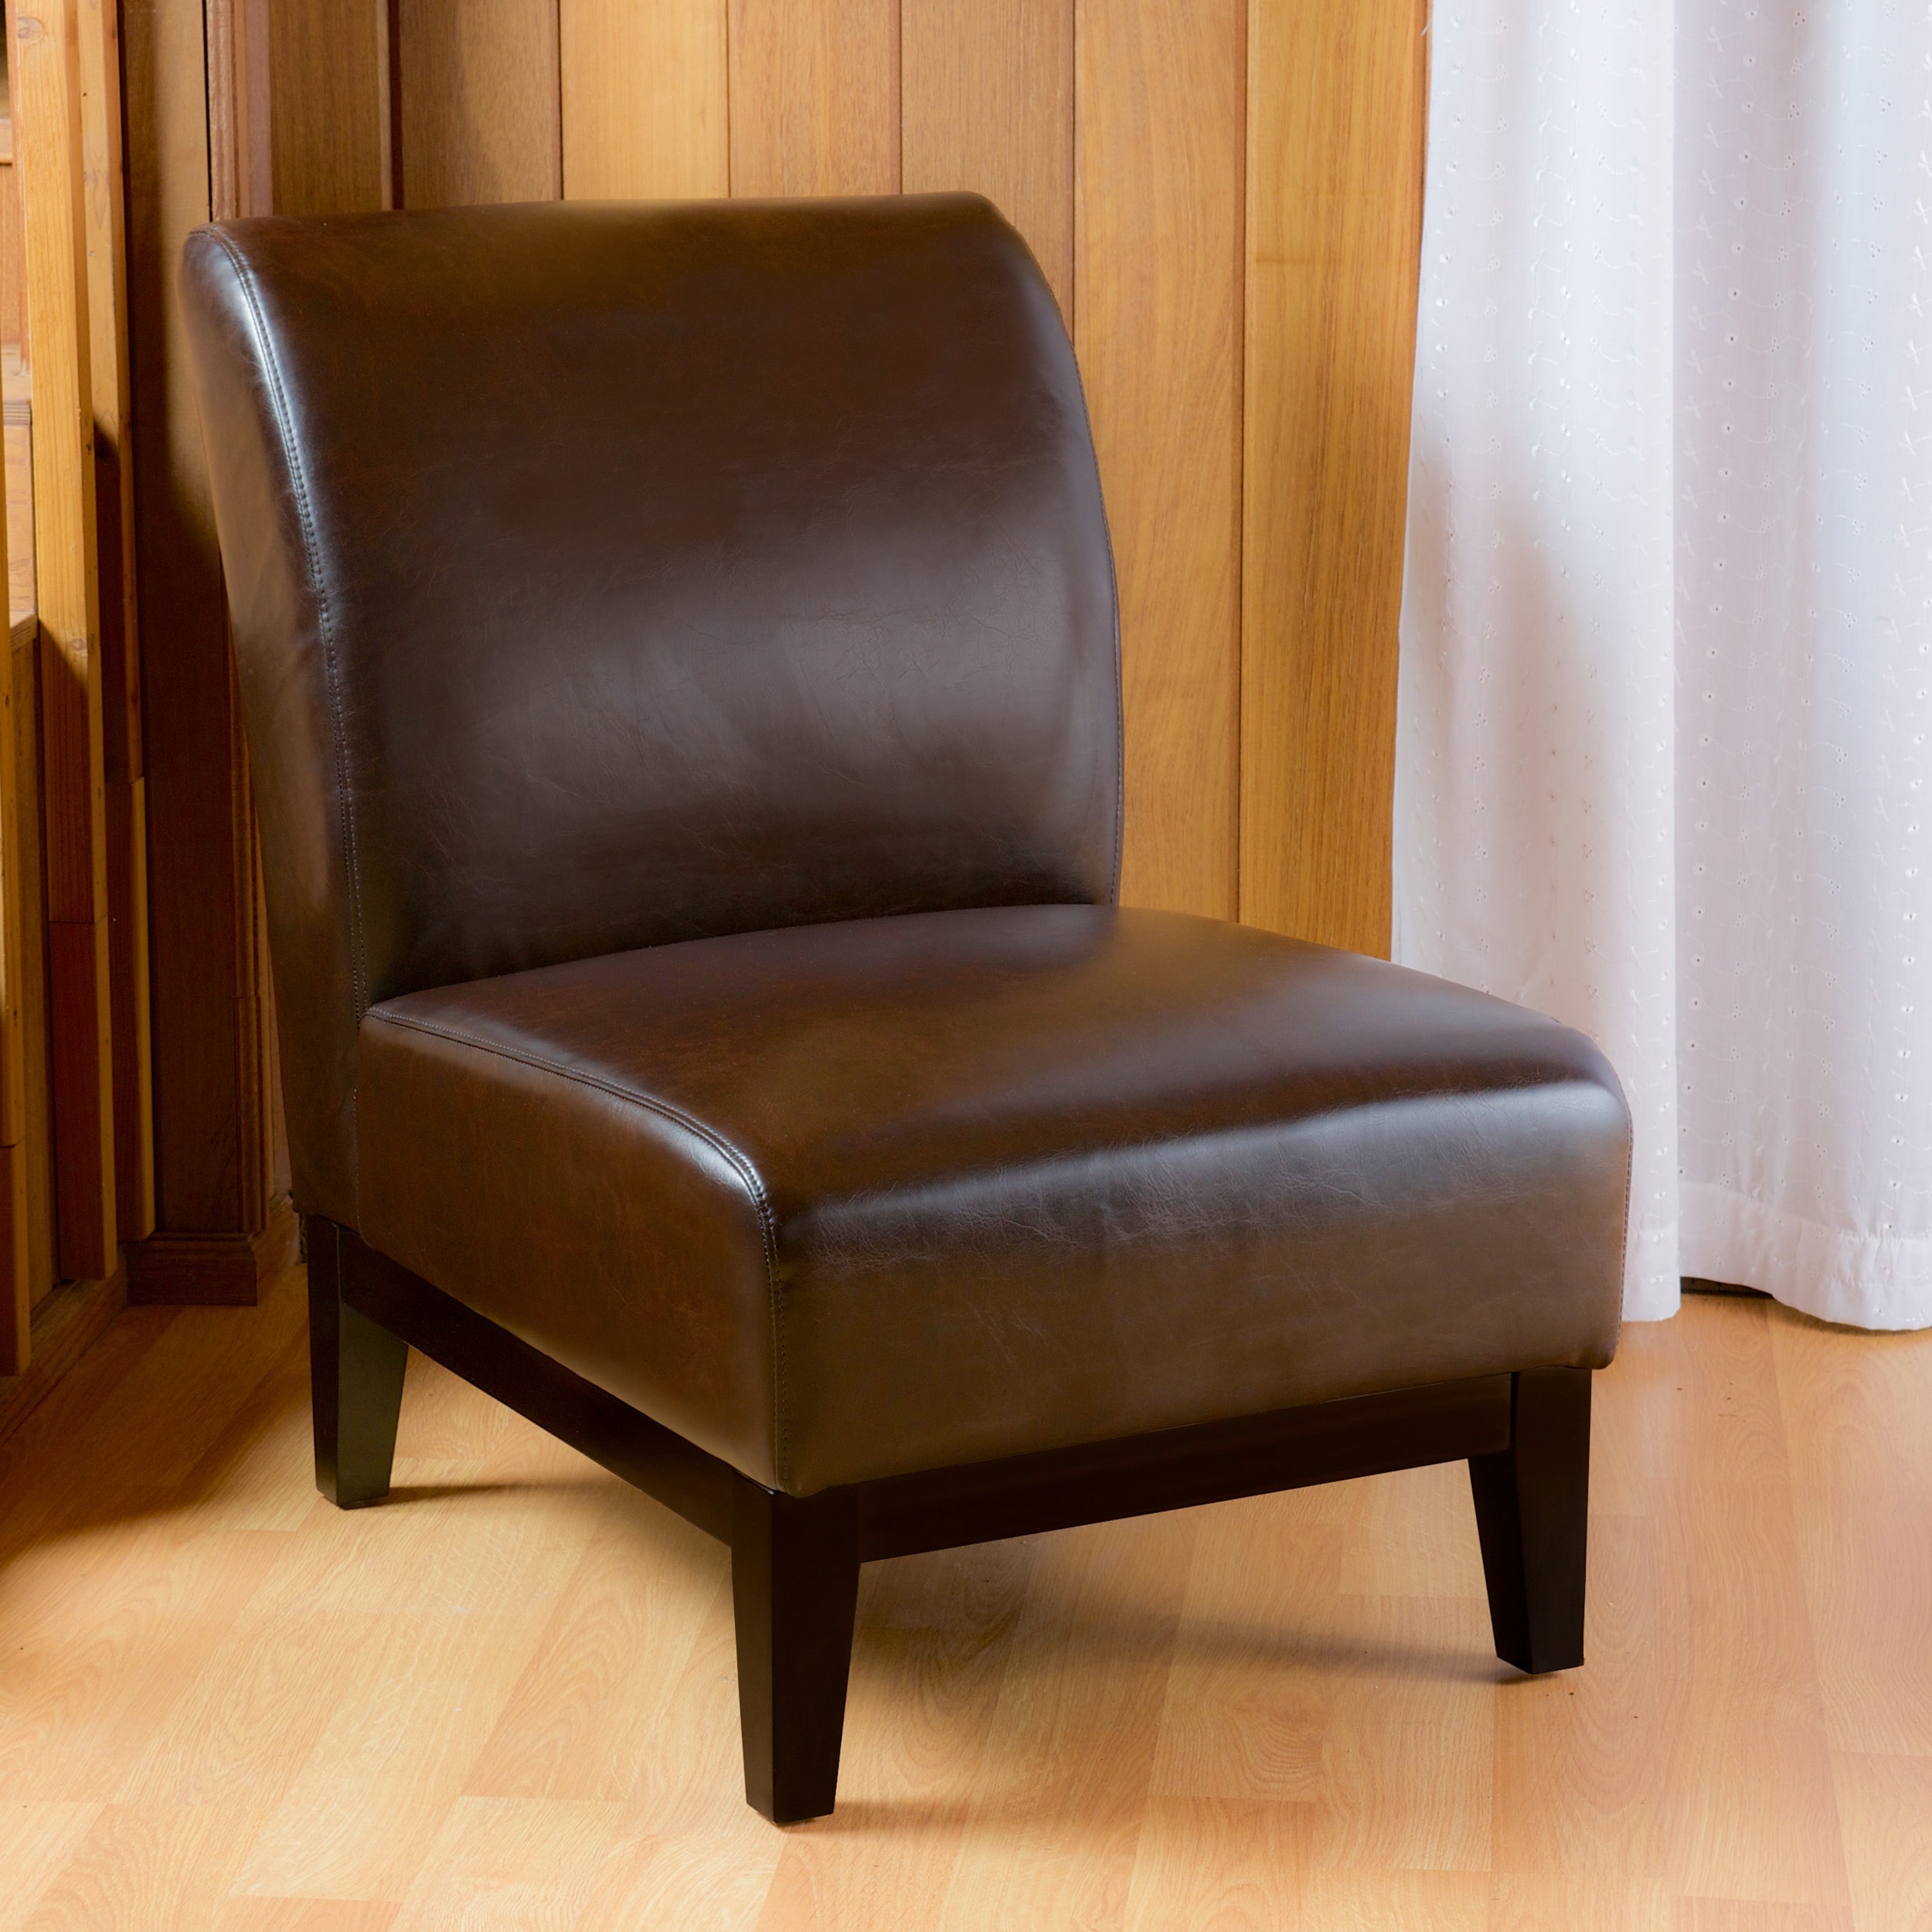 Christopher Knight Home Darcy Brown Leather Slipper Chair